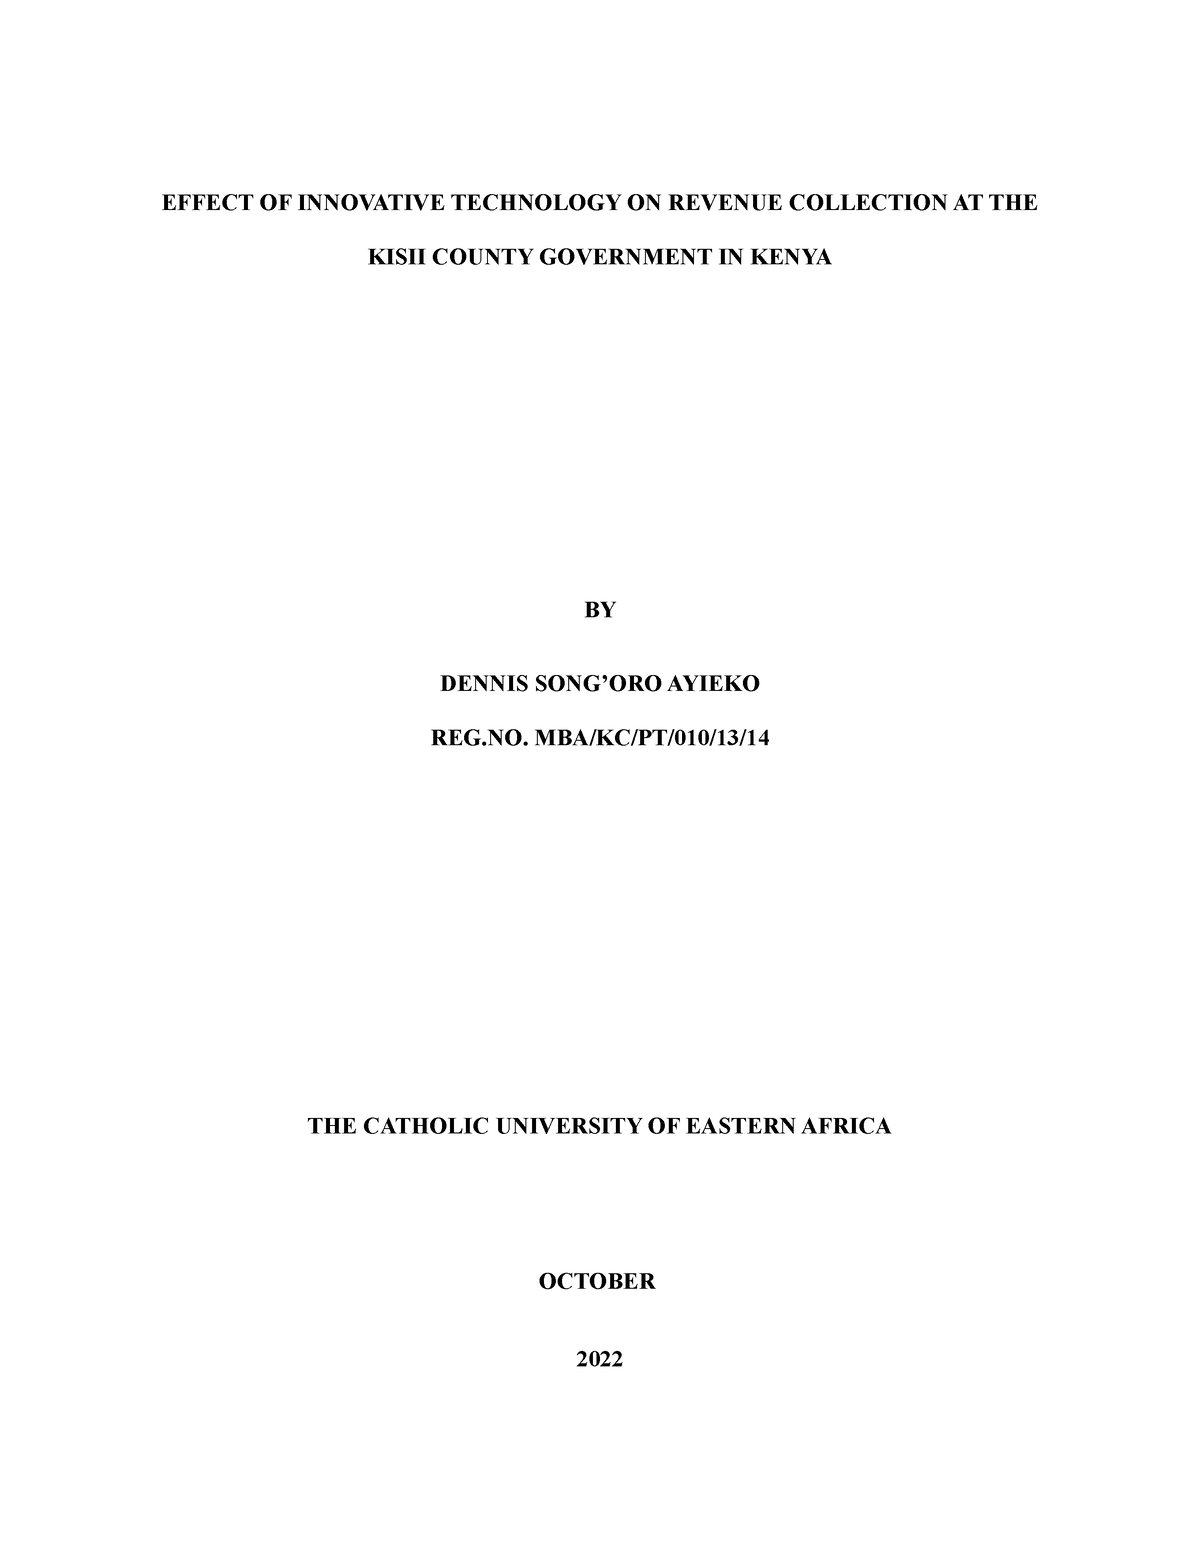 thesis on revenue collection